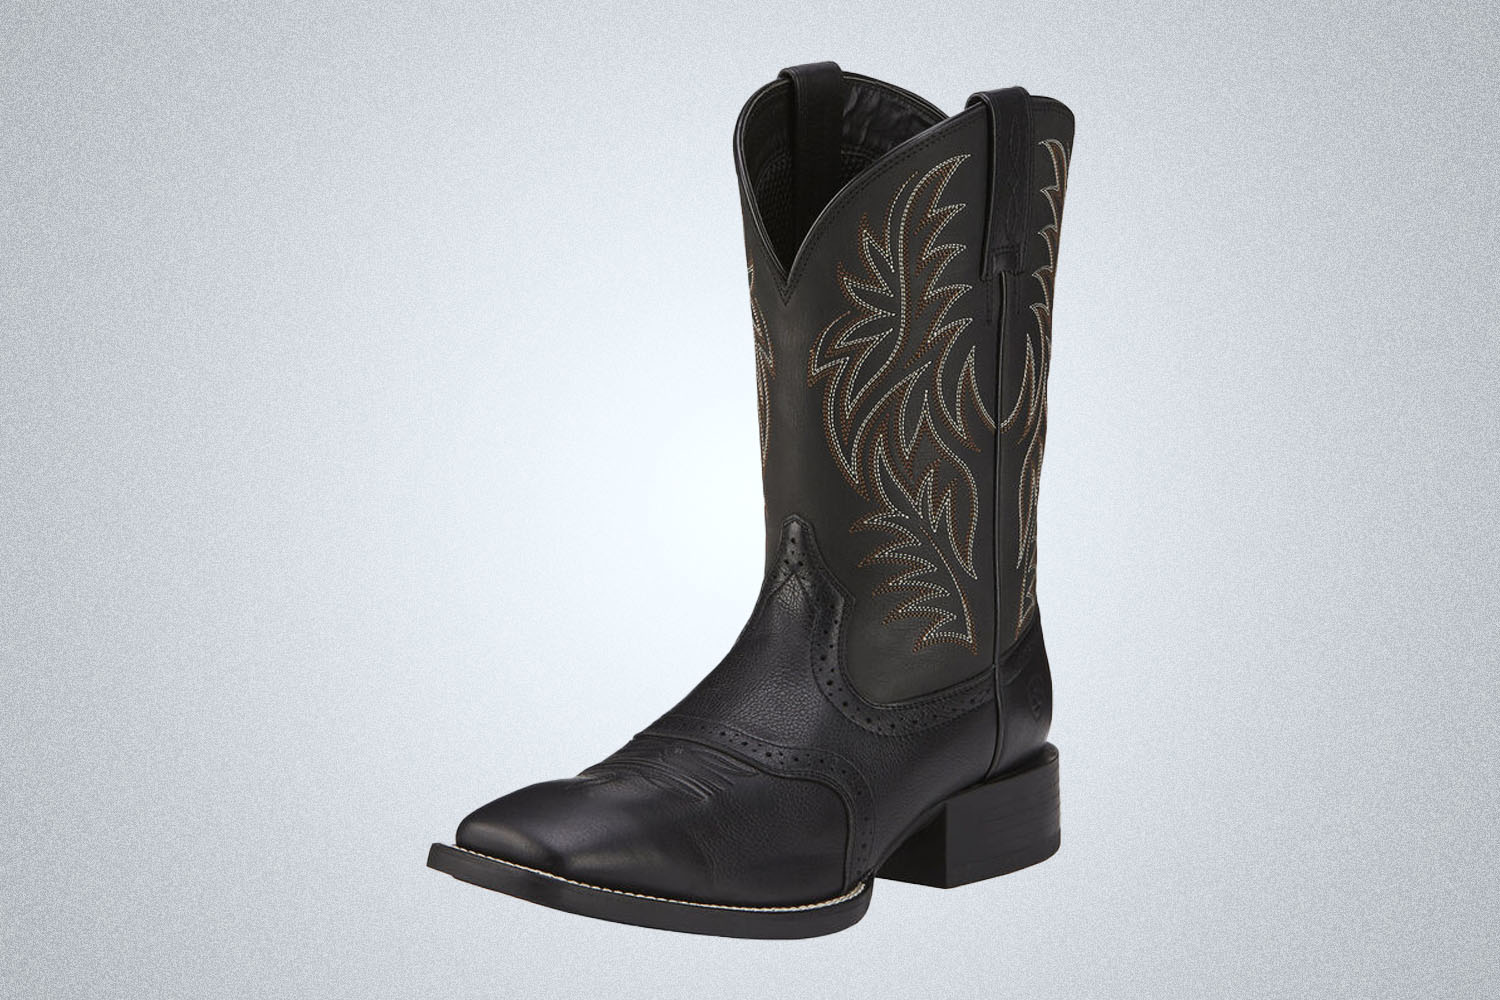 a leather Ariat western boot on a grey background